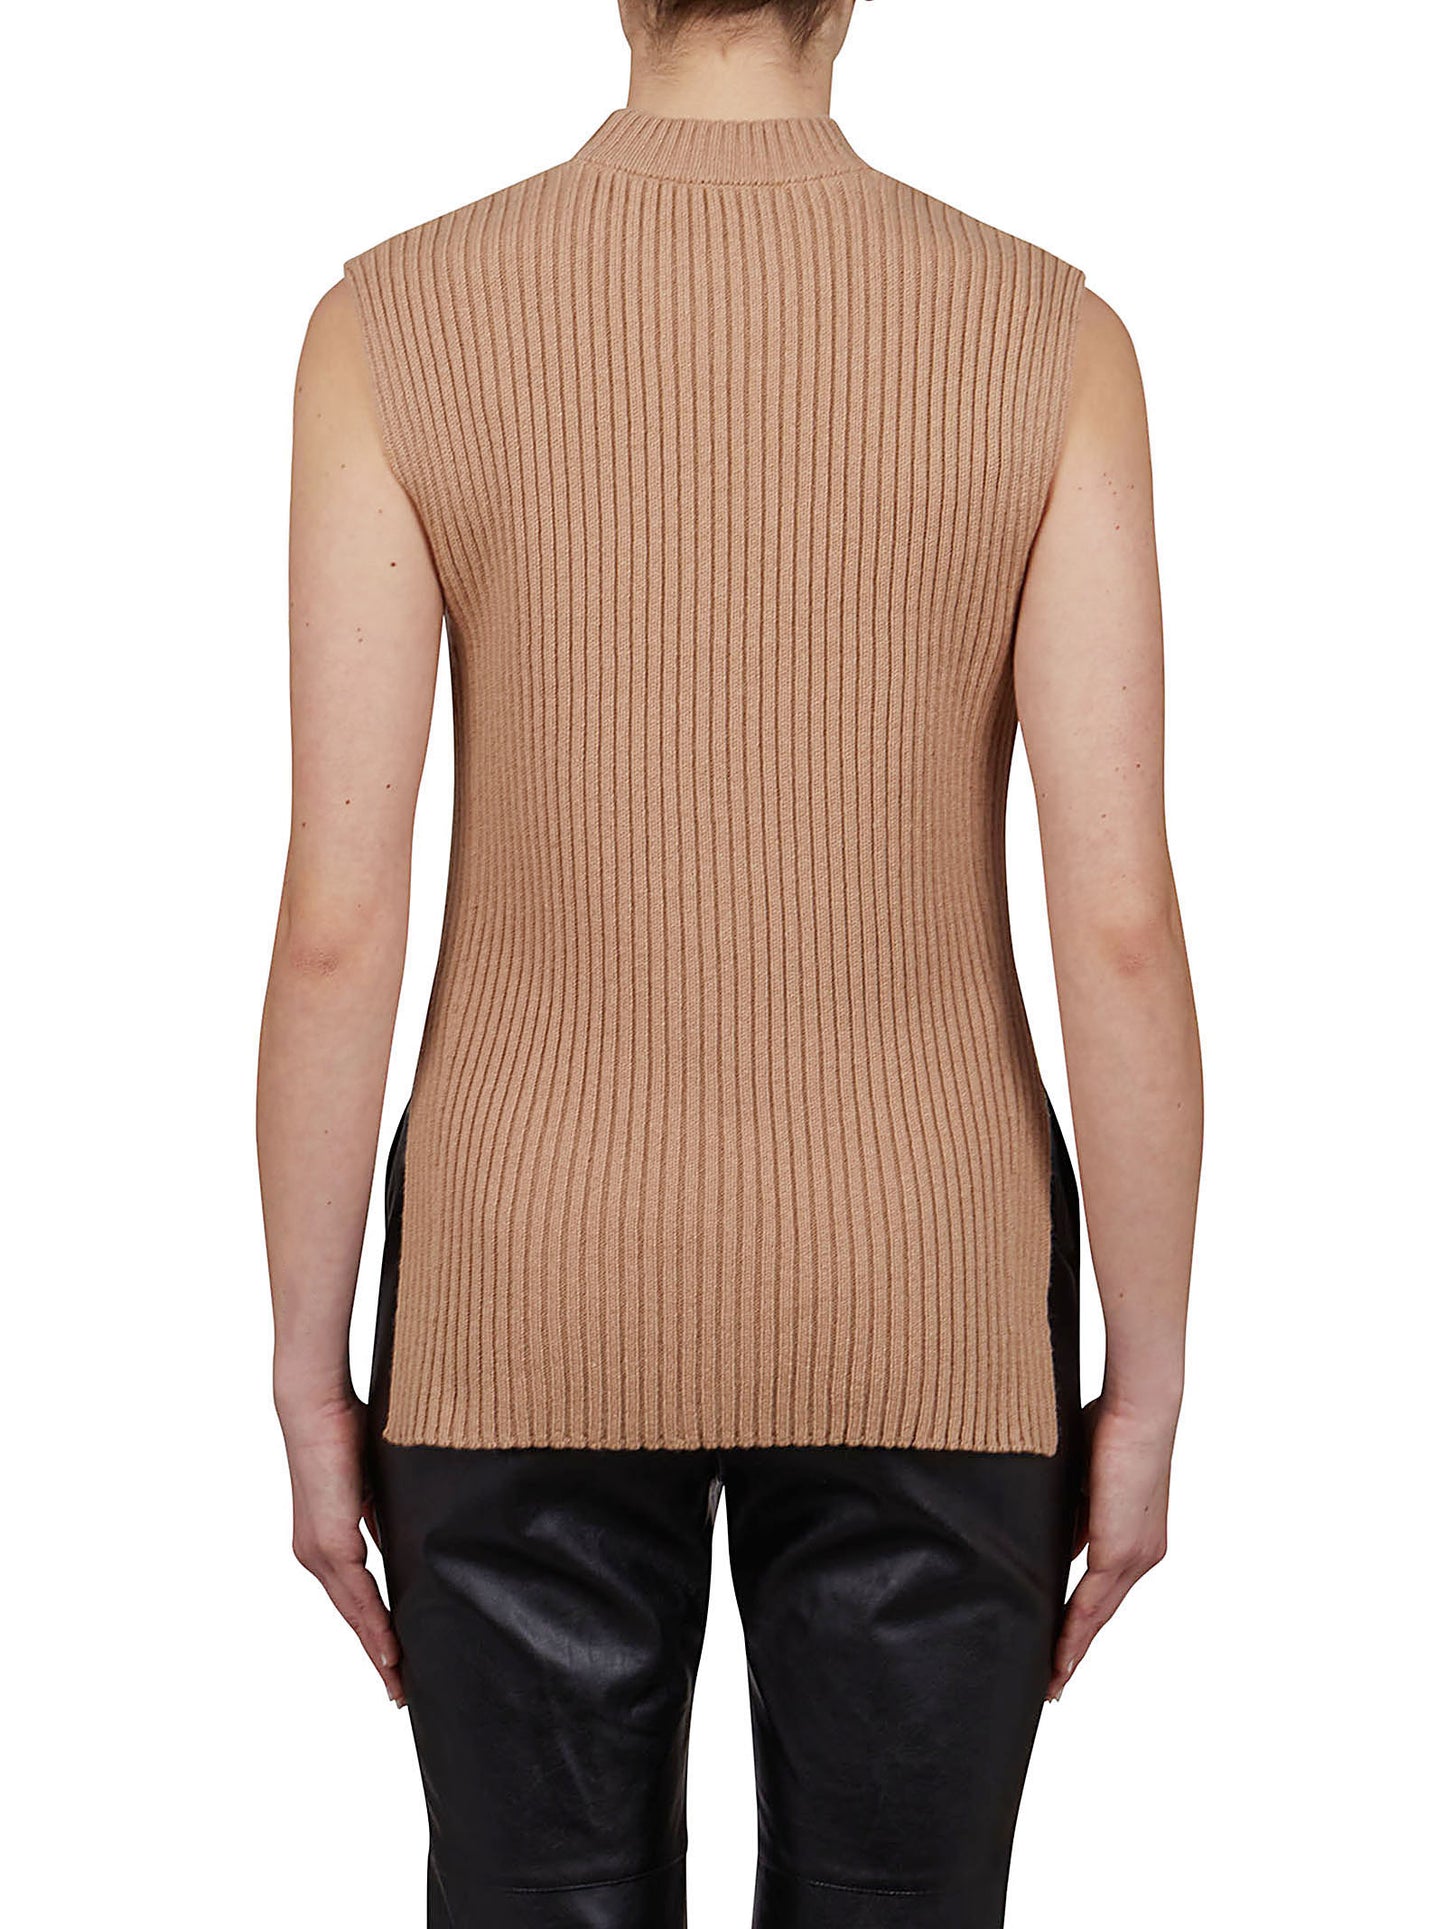 The Ribbed Camel Sleeveless Wool Knit by Purotatto